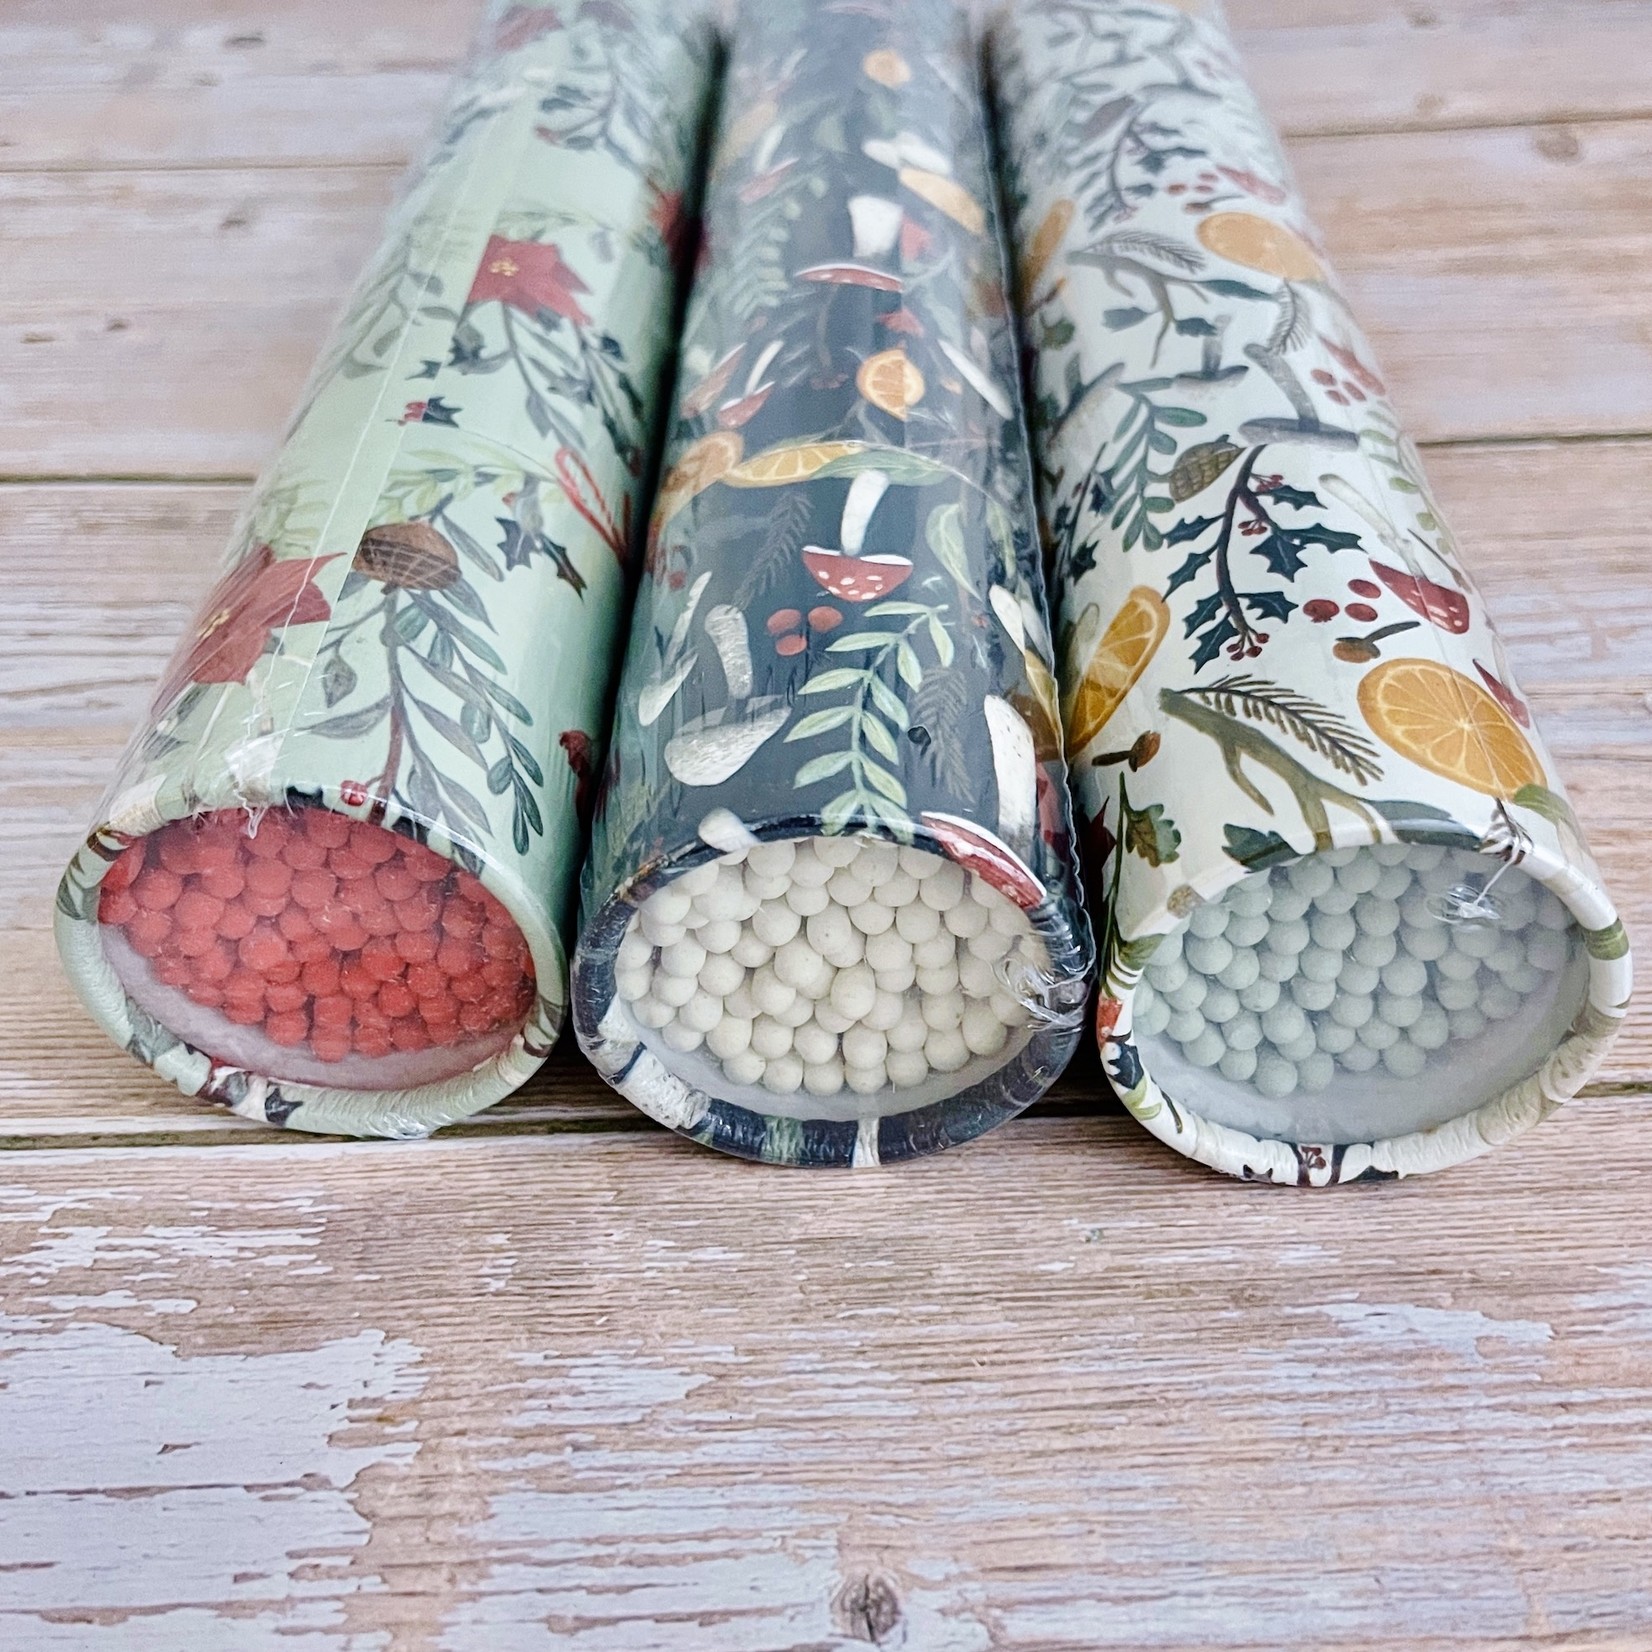 Fireplace Safety Matches in Tube Matchbox with Holiday Foliage